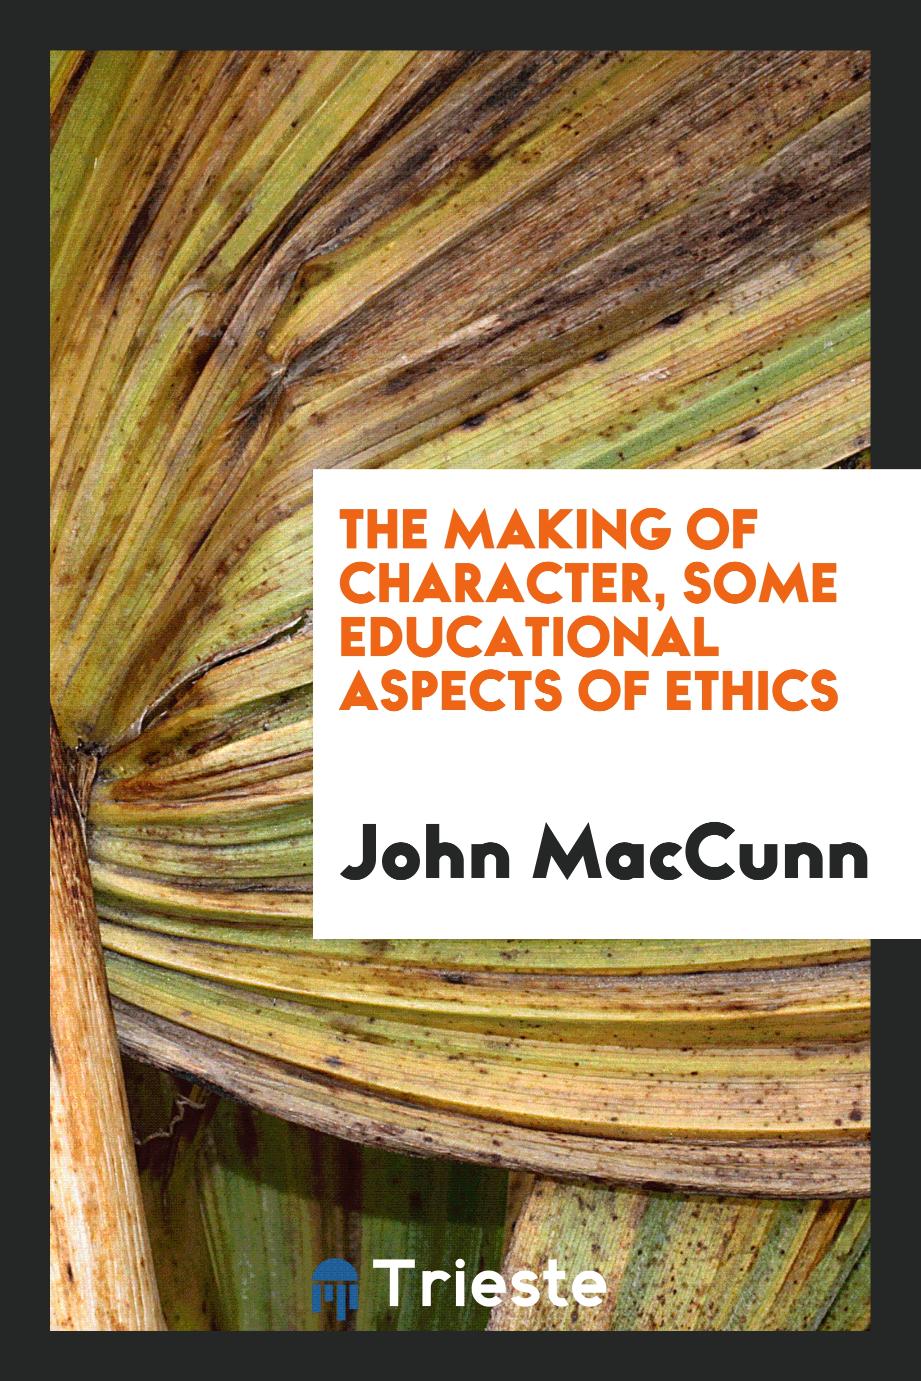 The making of character, some educational aspects of ethics